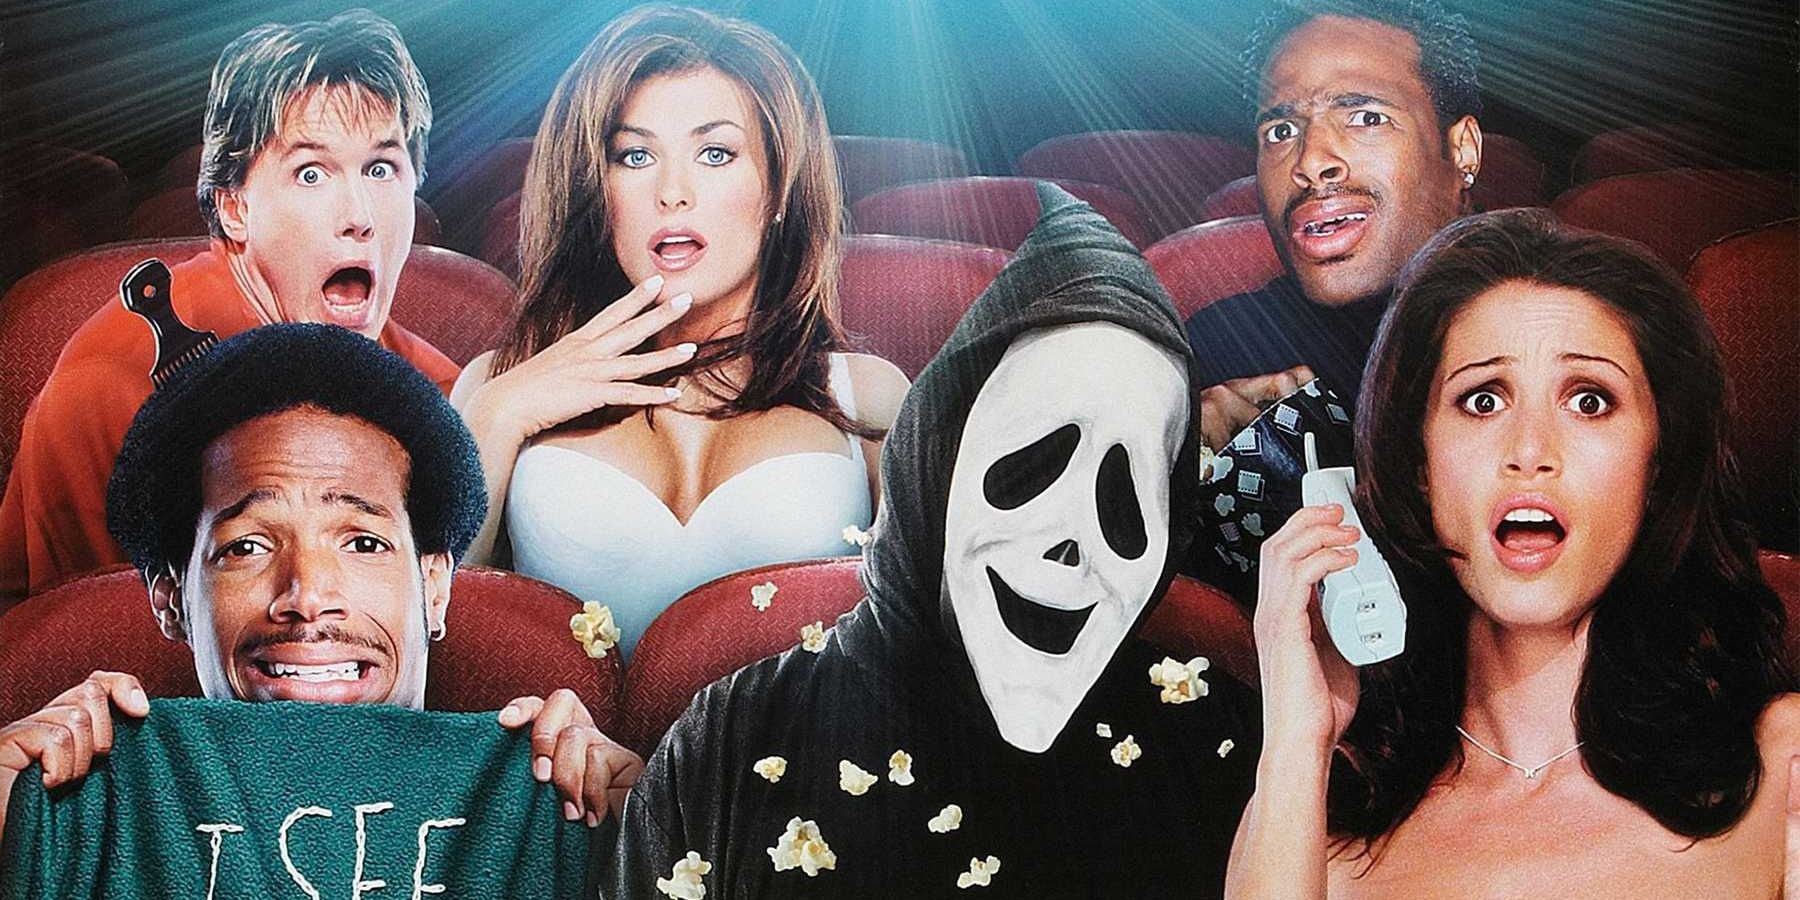 Poster for Scary movie with cast.